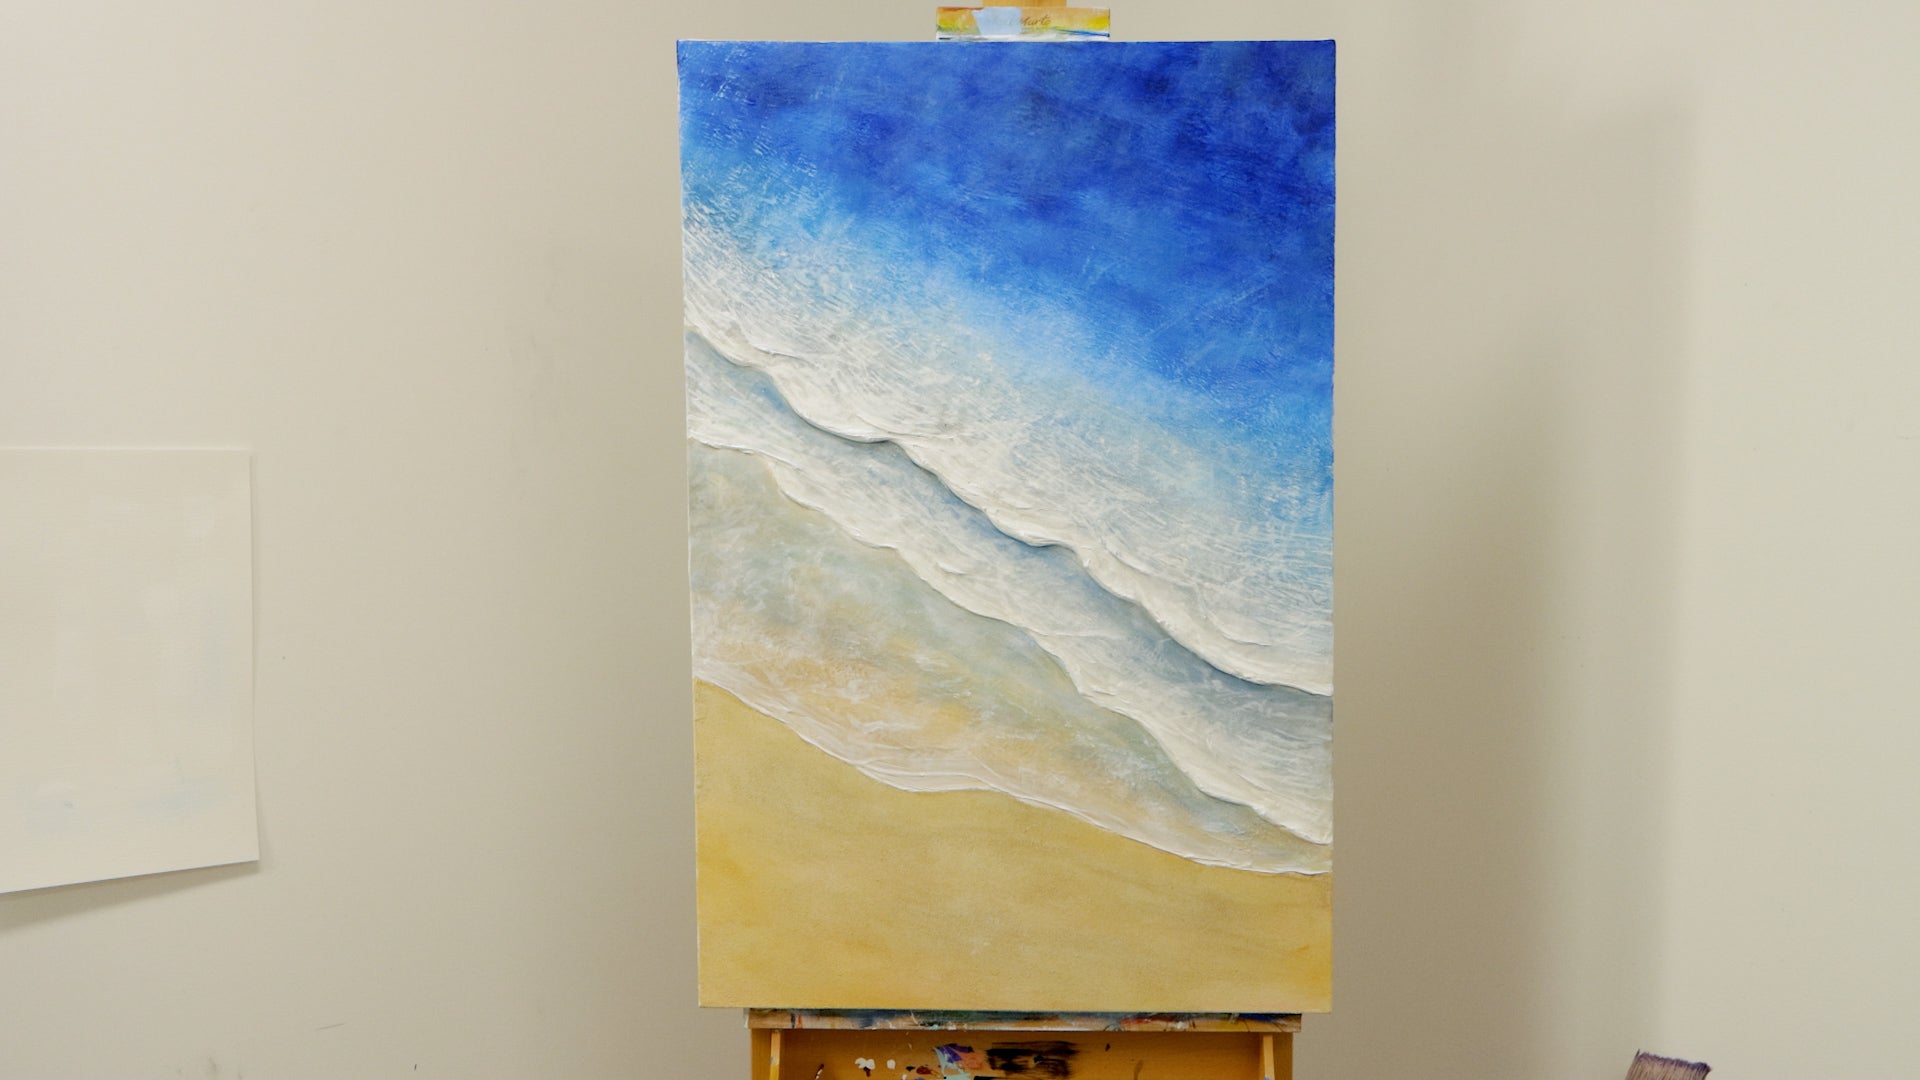 Video: How to Add Molding Paste (or modeling paste) to a Canvas Painting